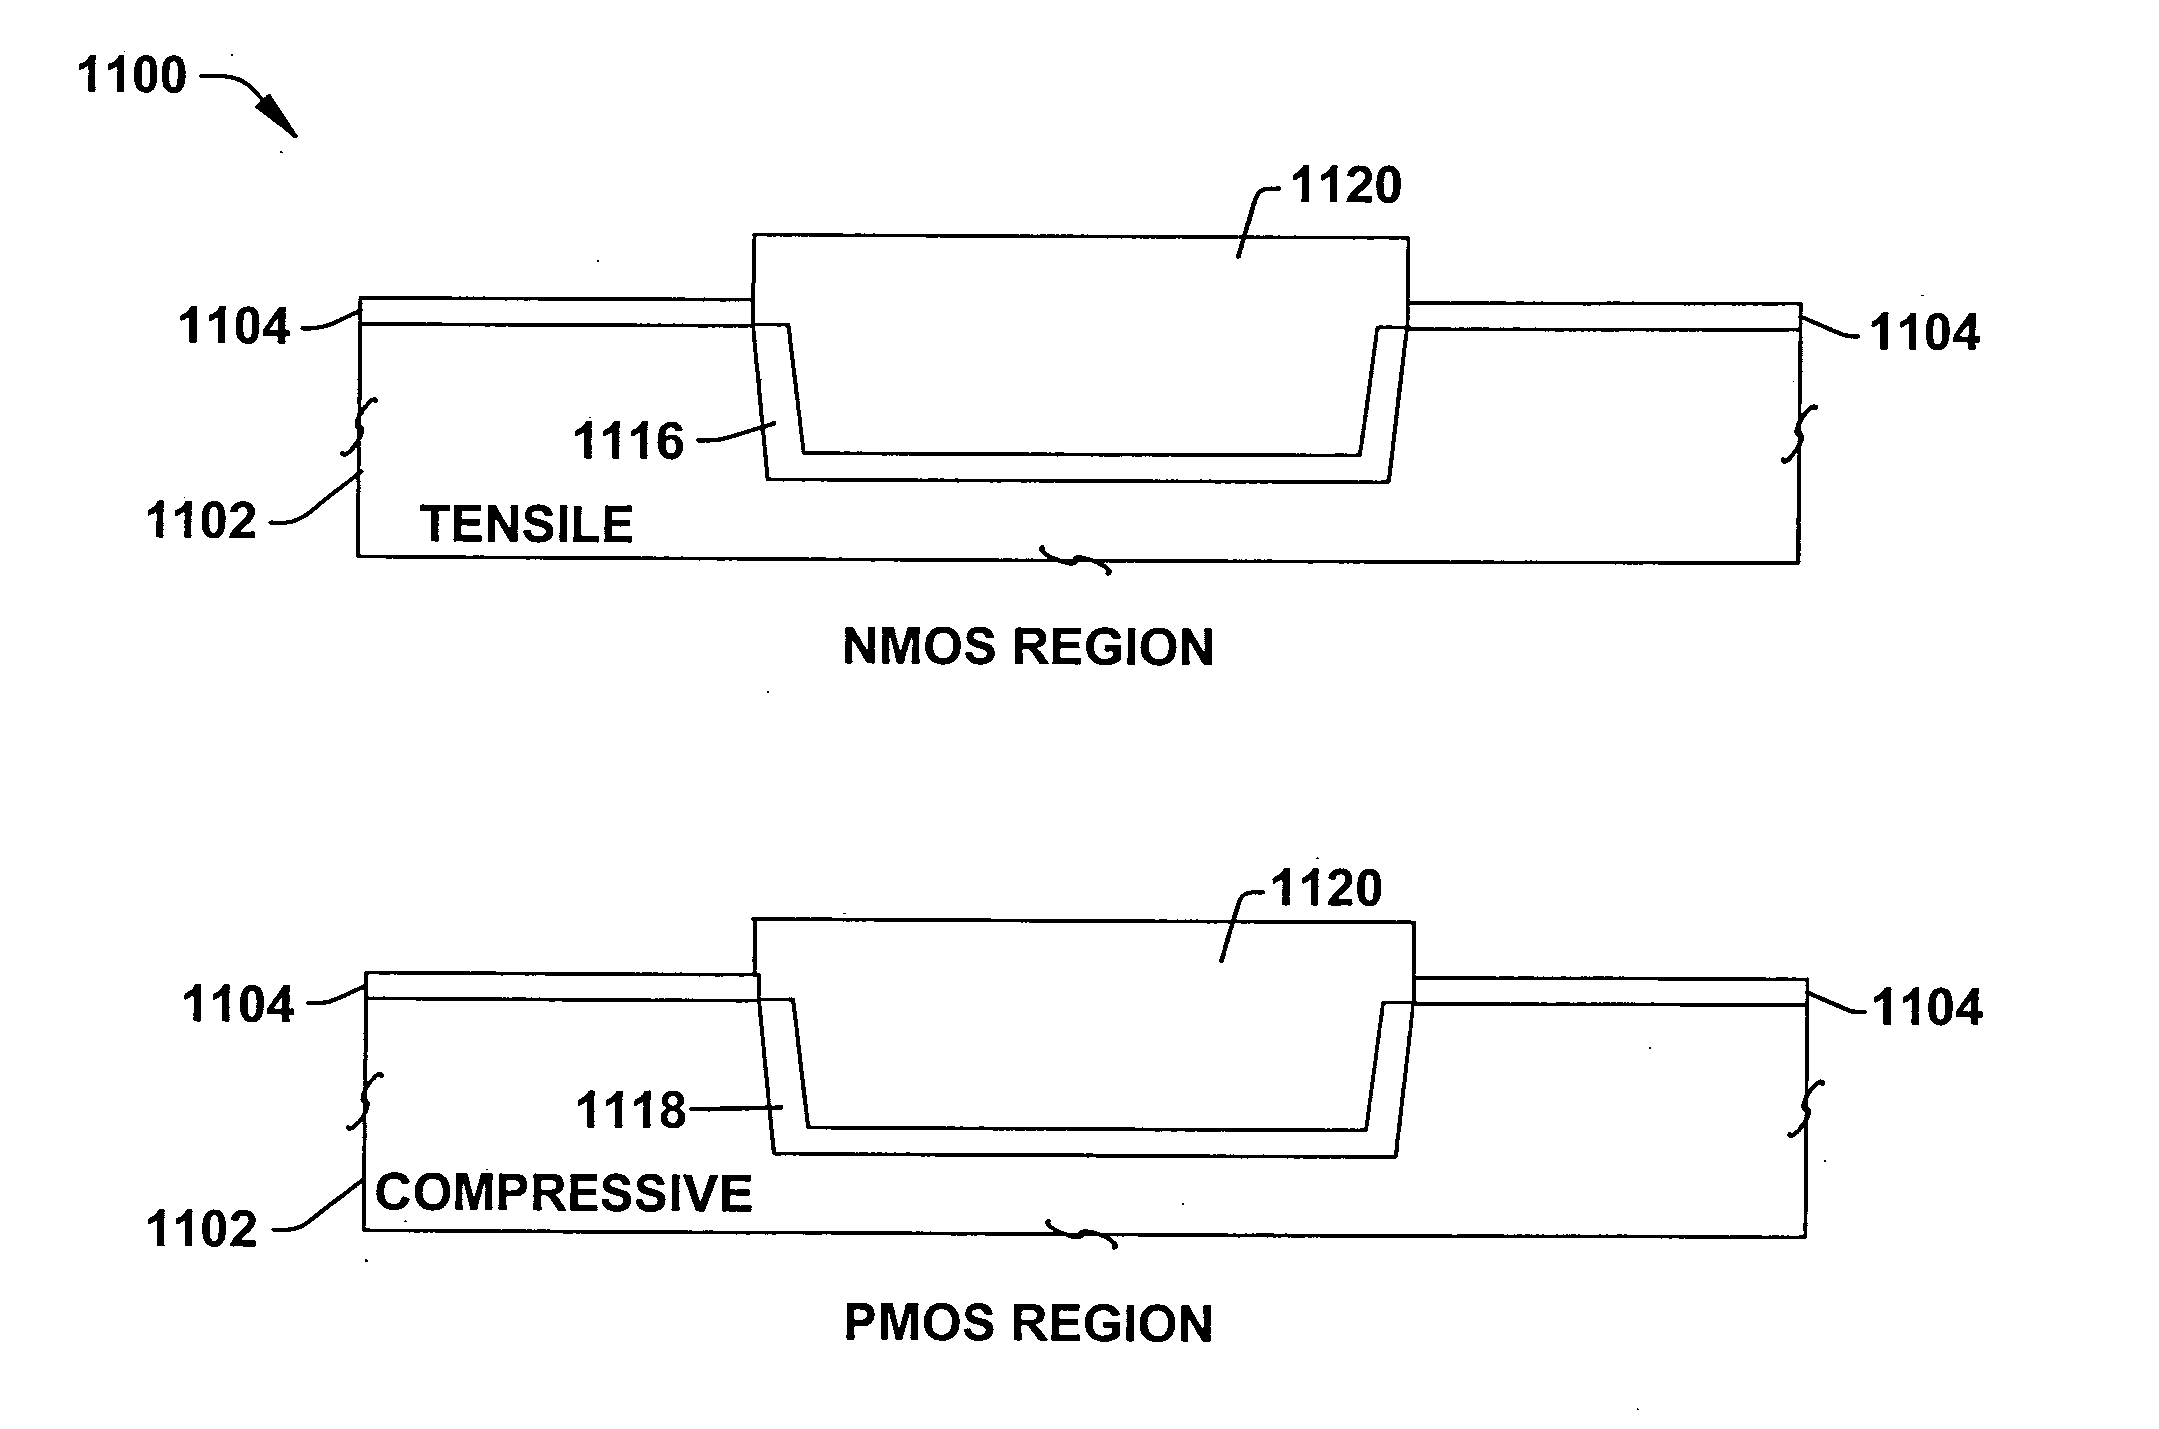 Strain modulation employing process techniques for CMOS technologies